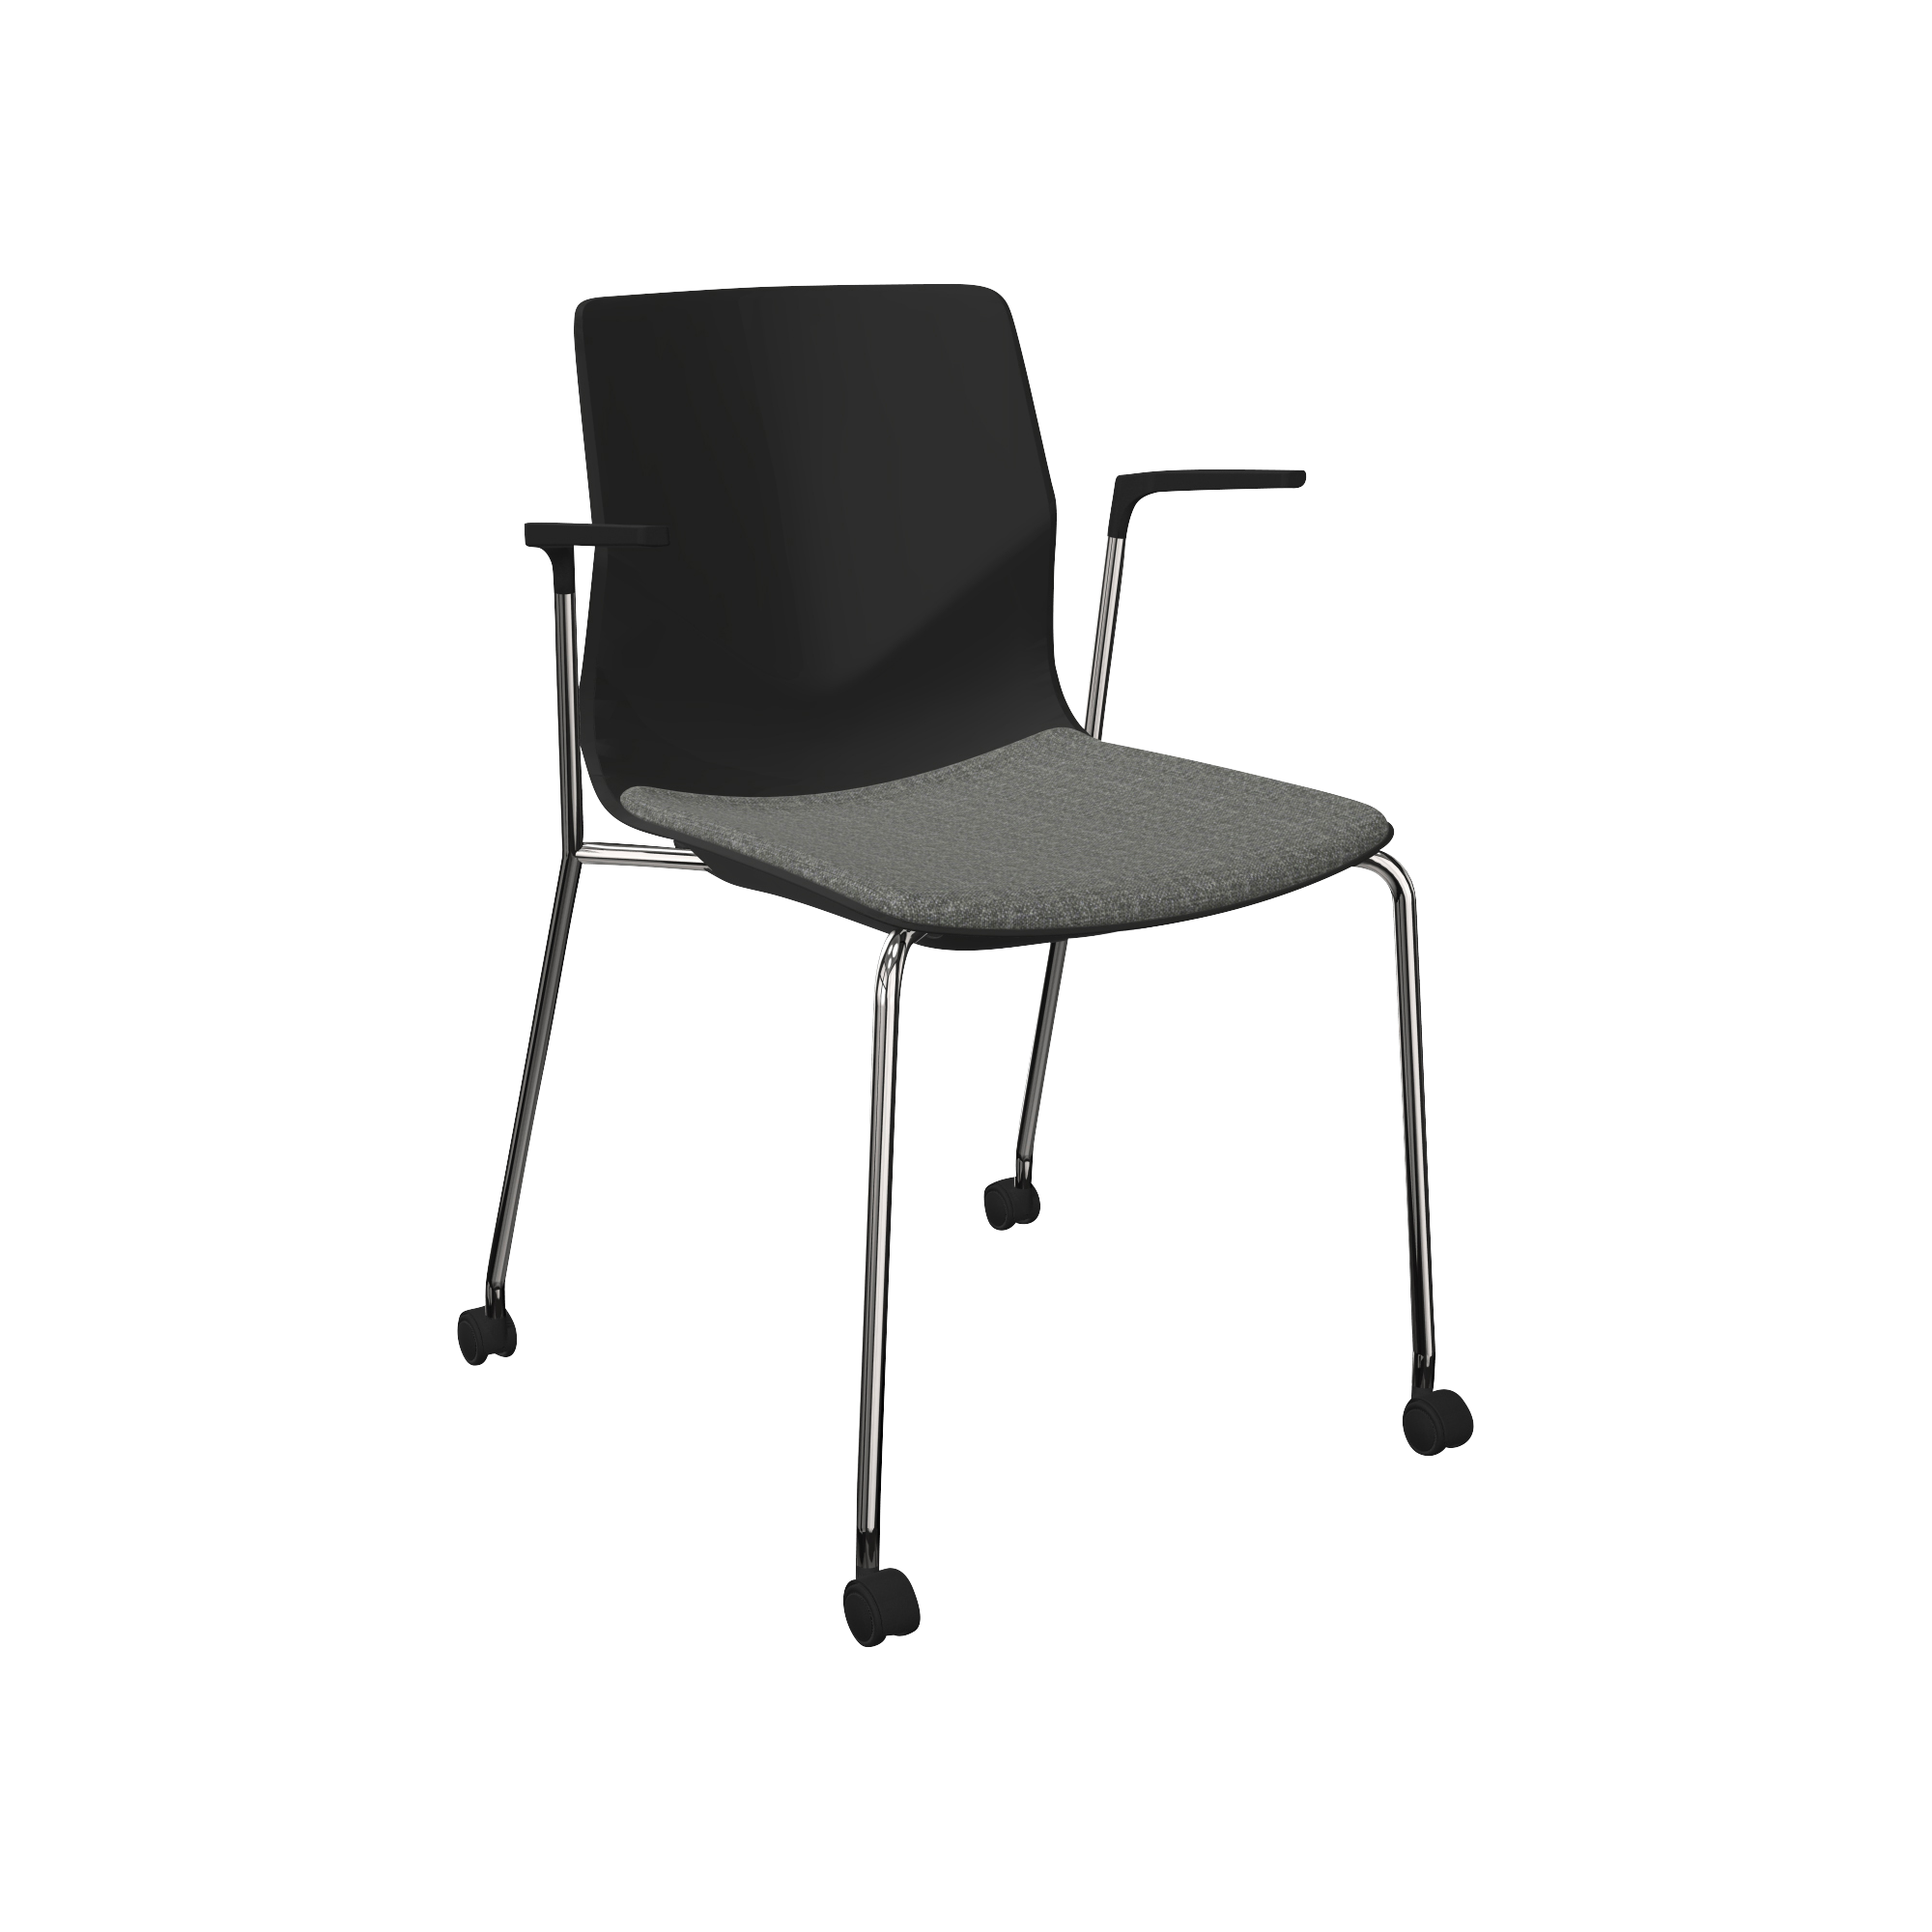 A black and grey chair with wheels